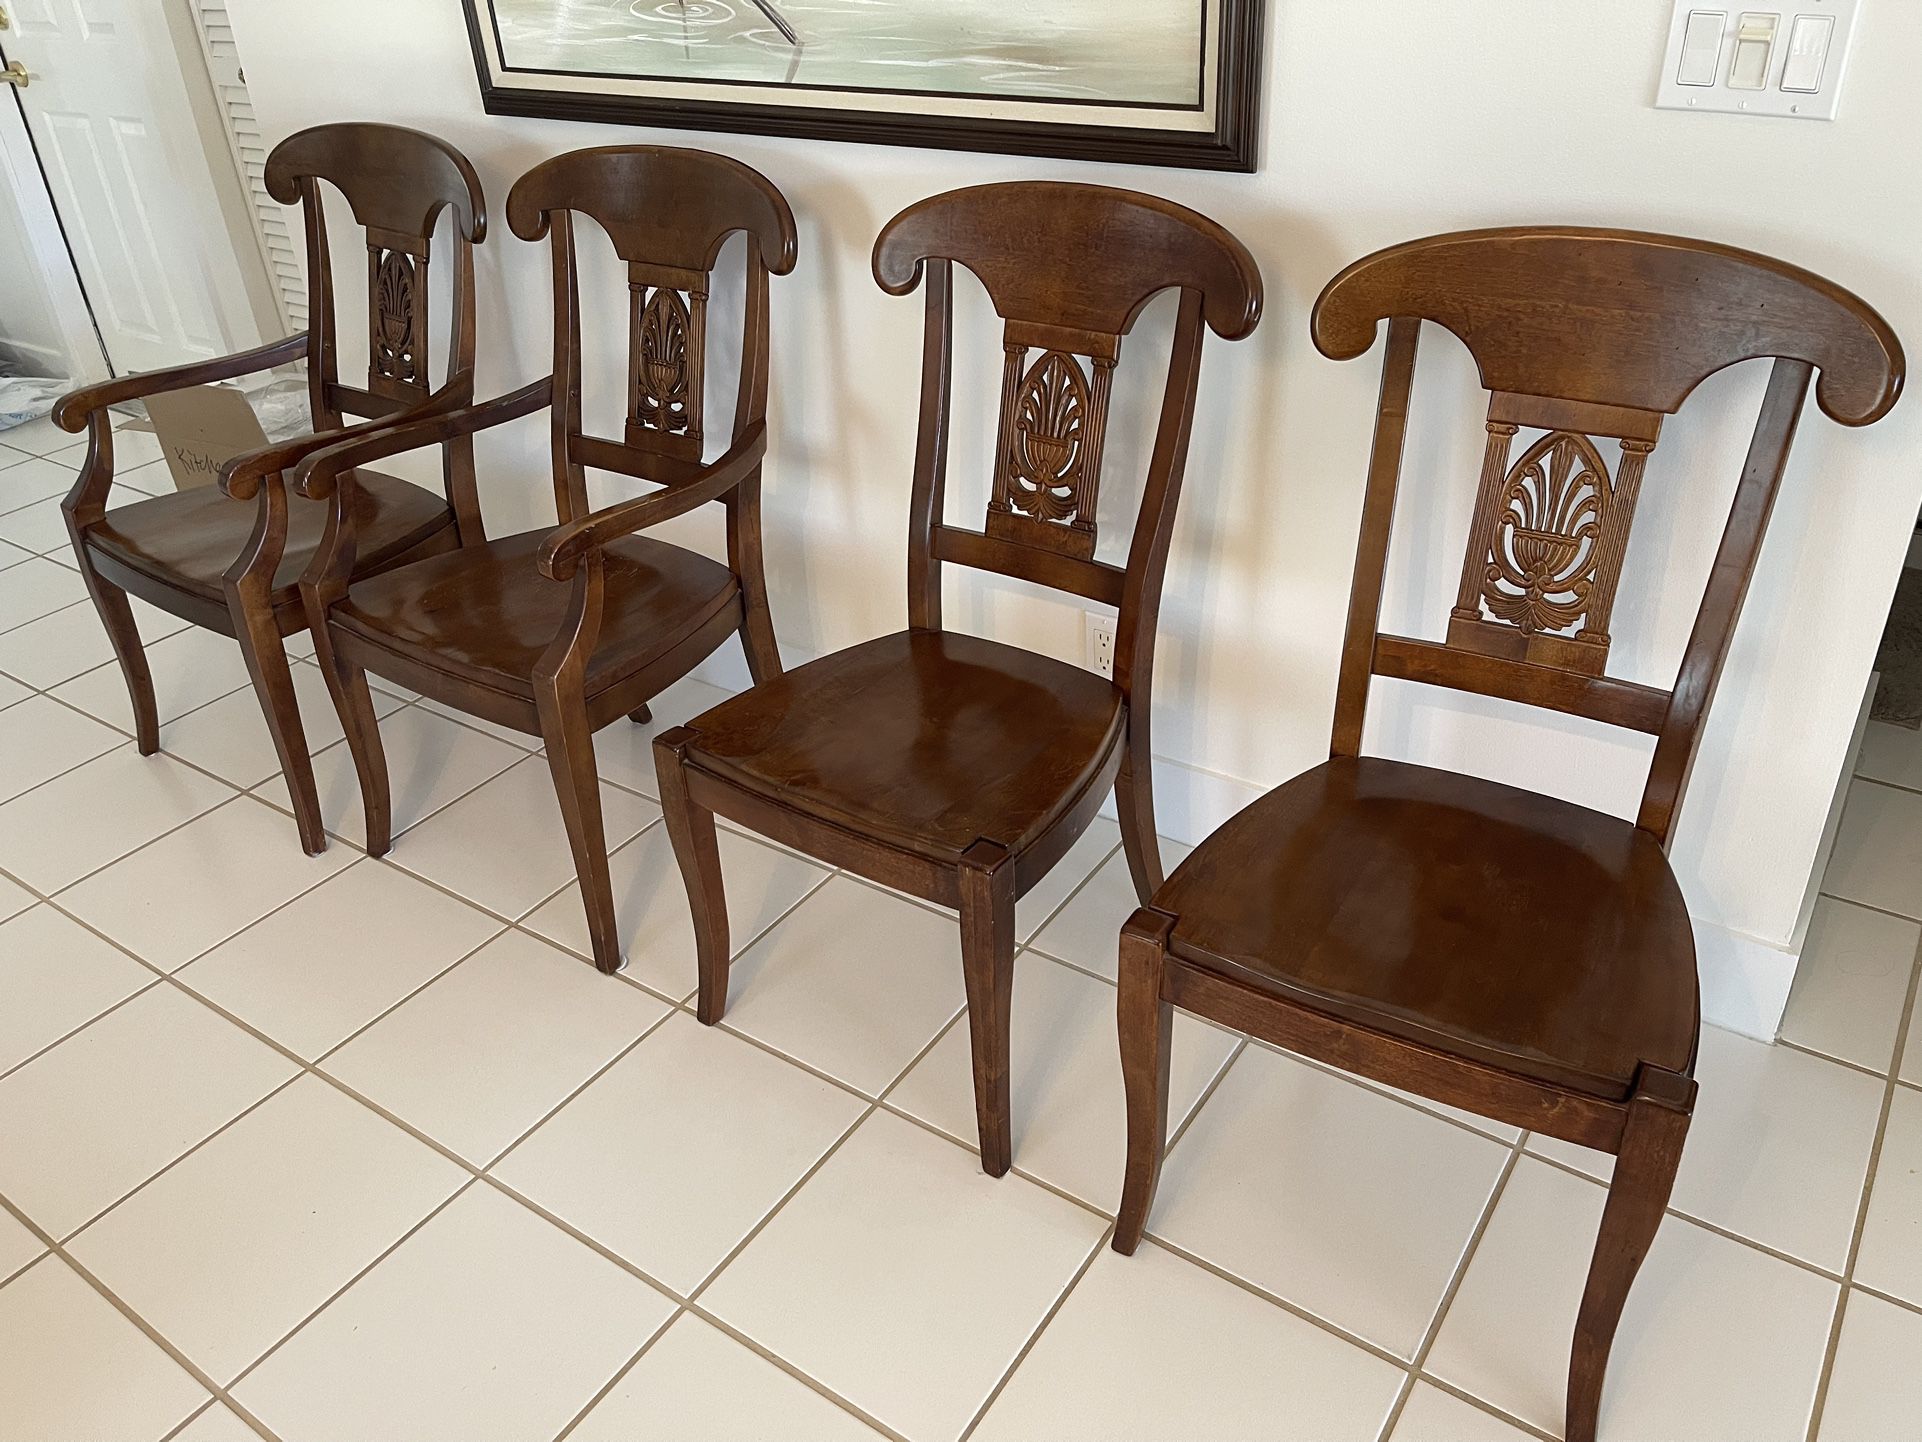 4 Wooden Ornate Chairs 